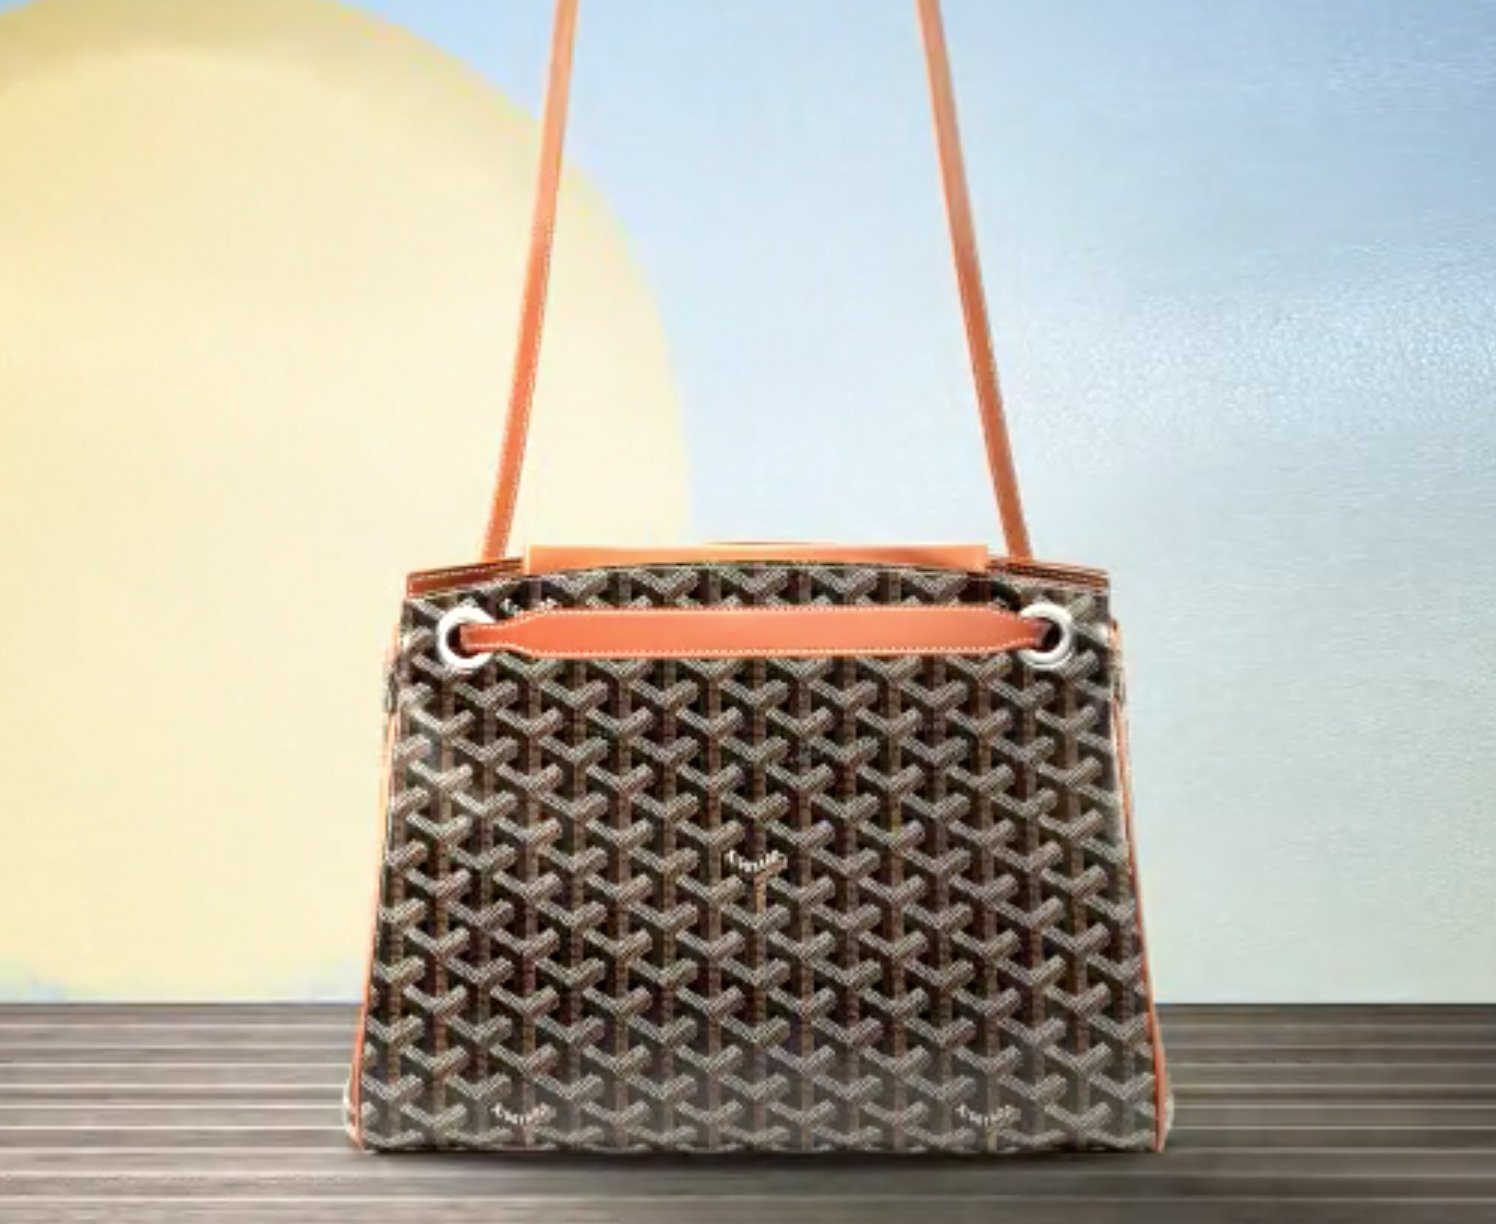 Maison Goyard on Instagram: “Introducing the Rouette soft bag. The